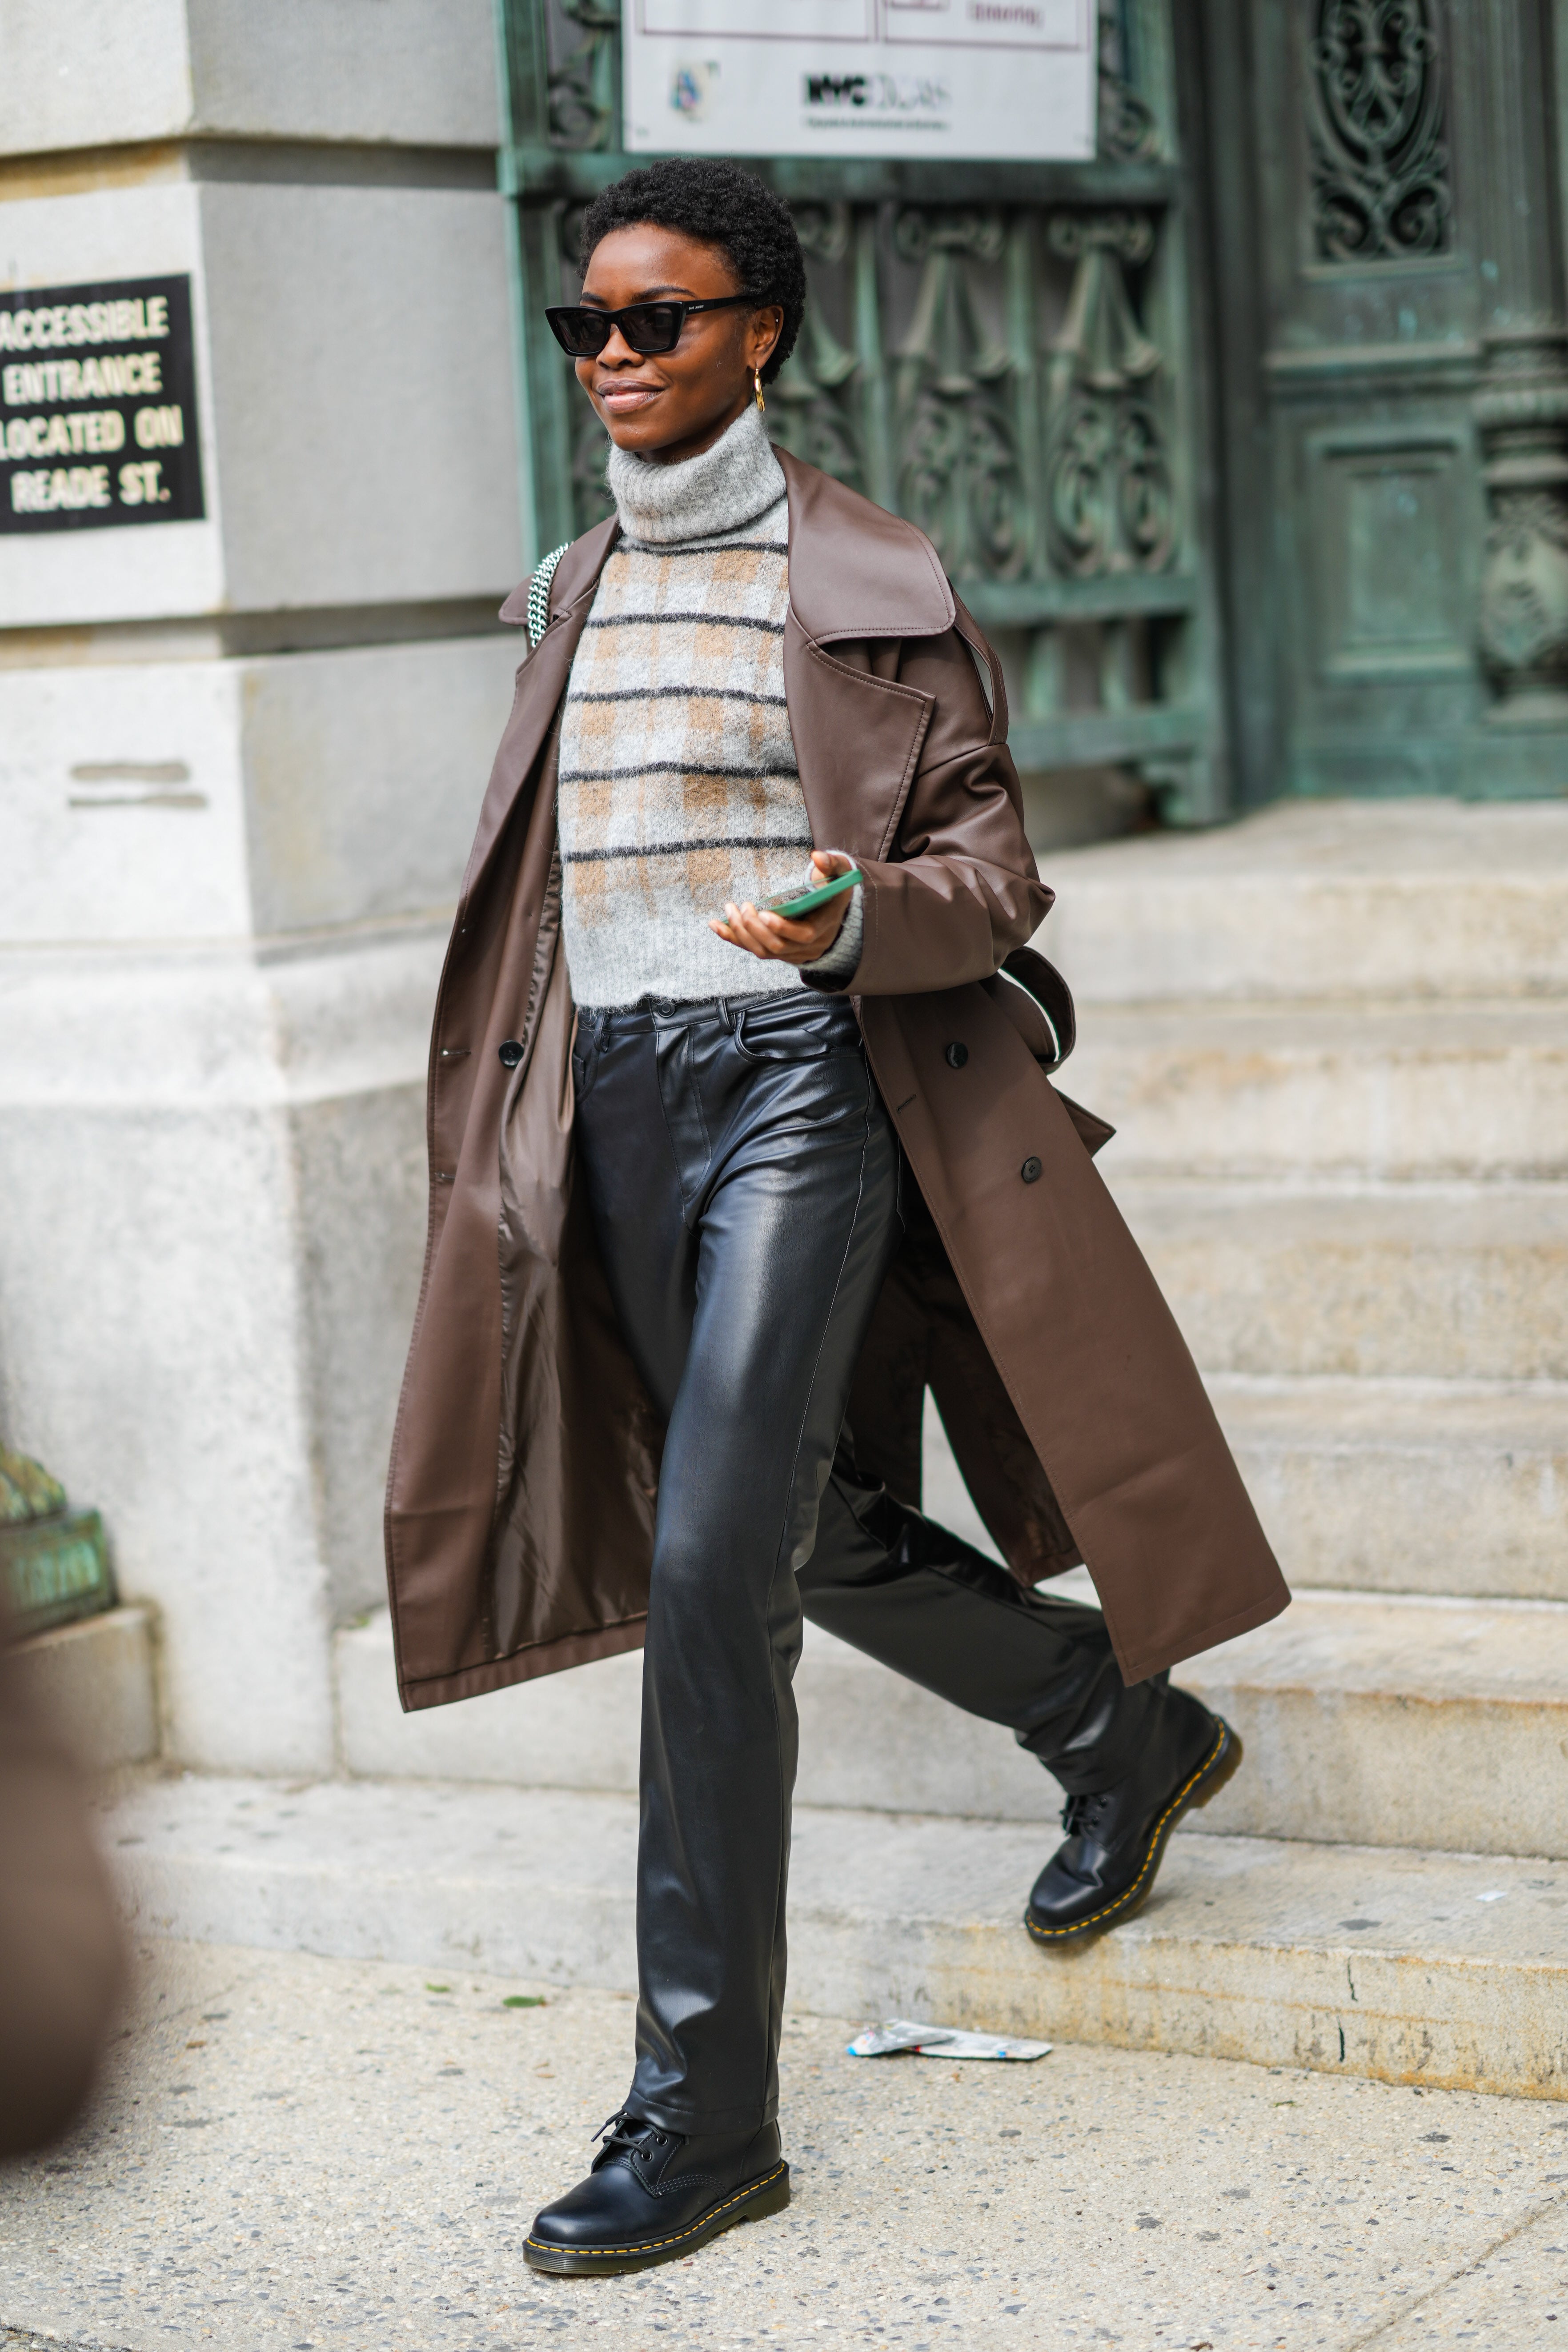 Brown Leather Pants Outfits For Women In Their 20s (3 ideas & outfits)